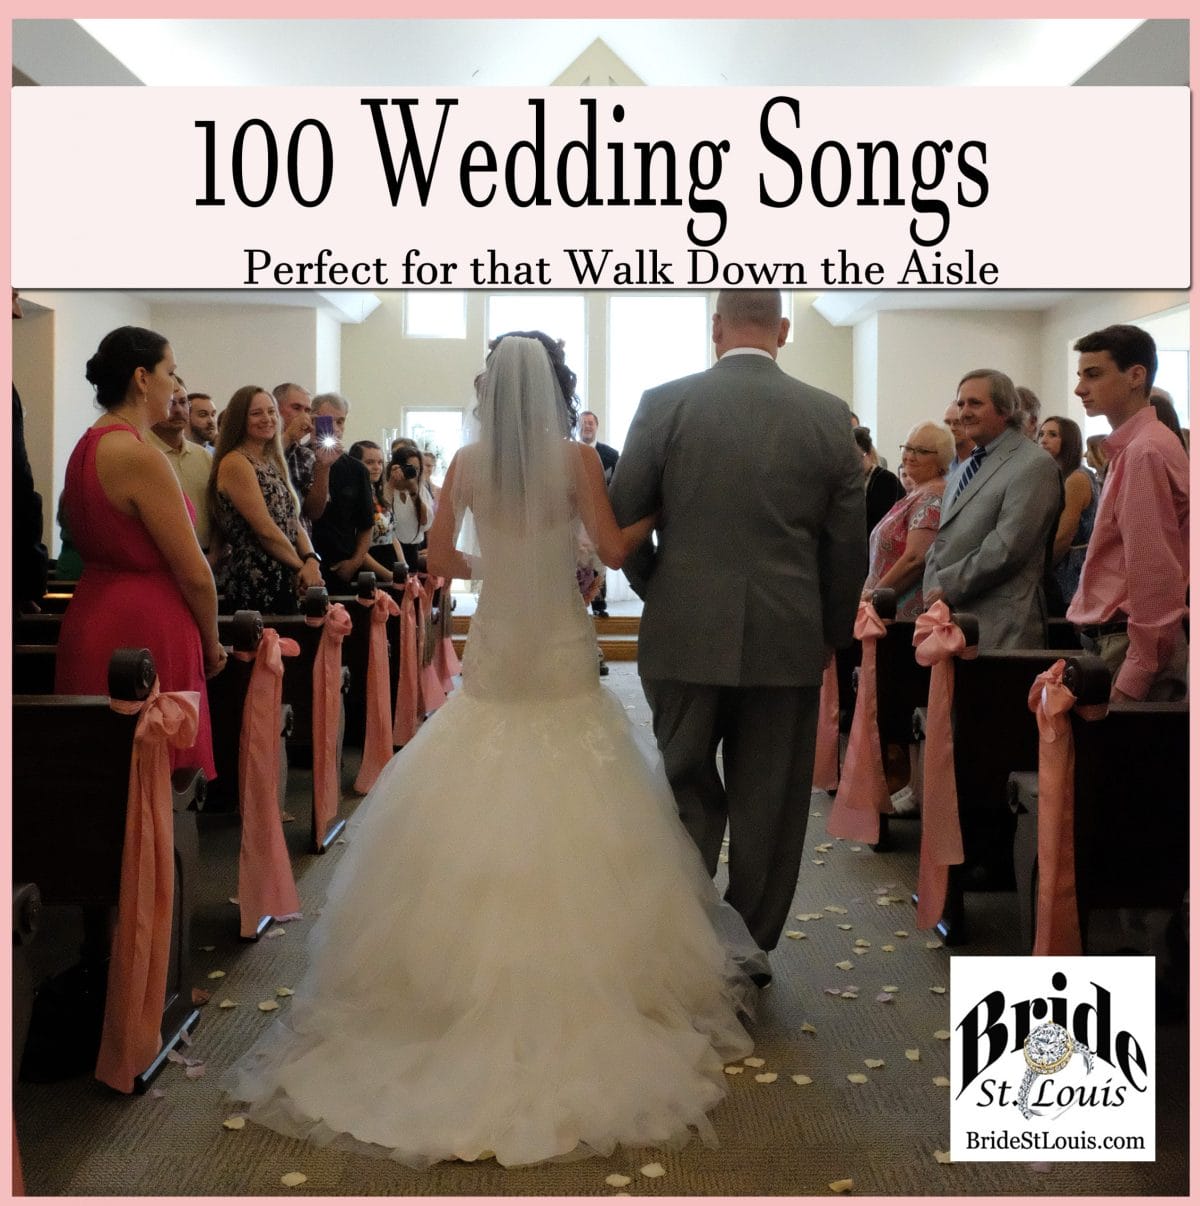 100 Instrumental Wedding Songs for the Walk Down the Aisle - Bride St. Louis